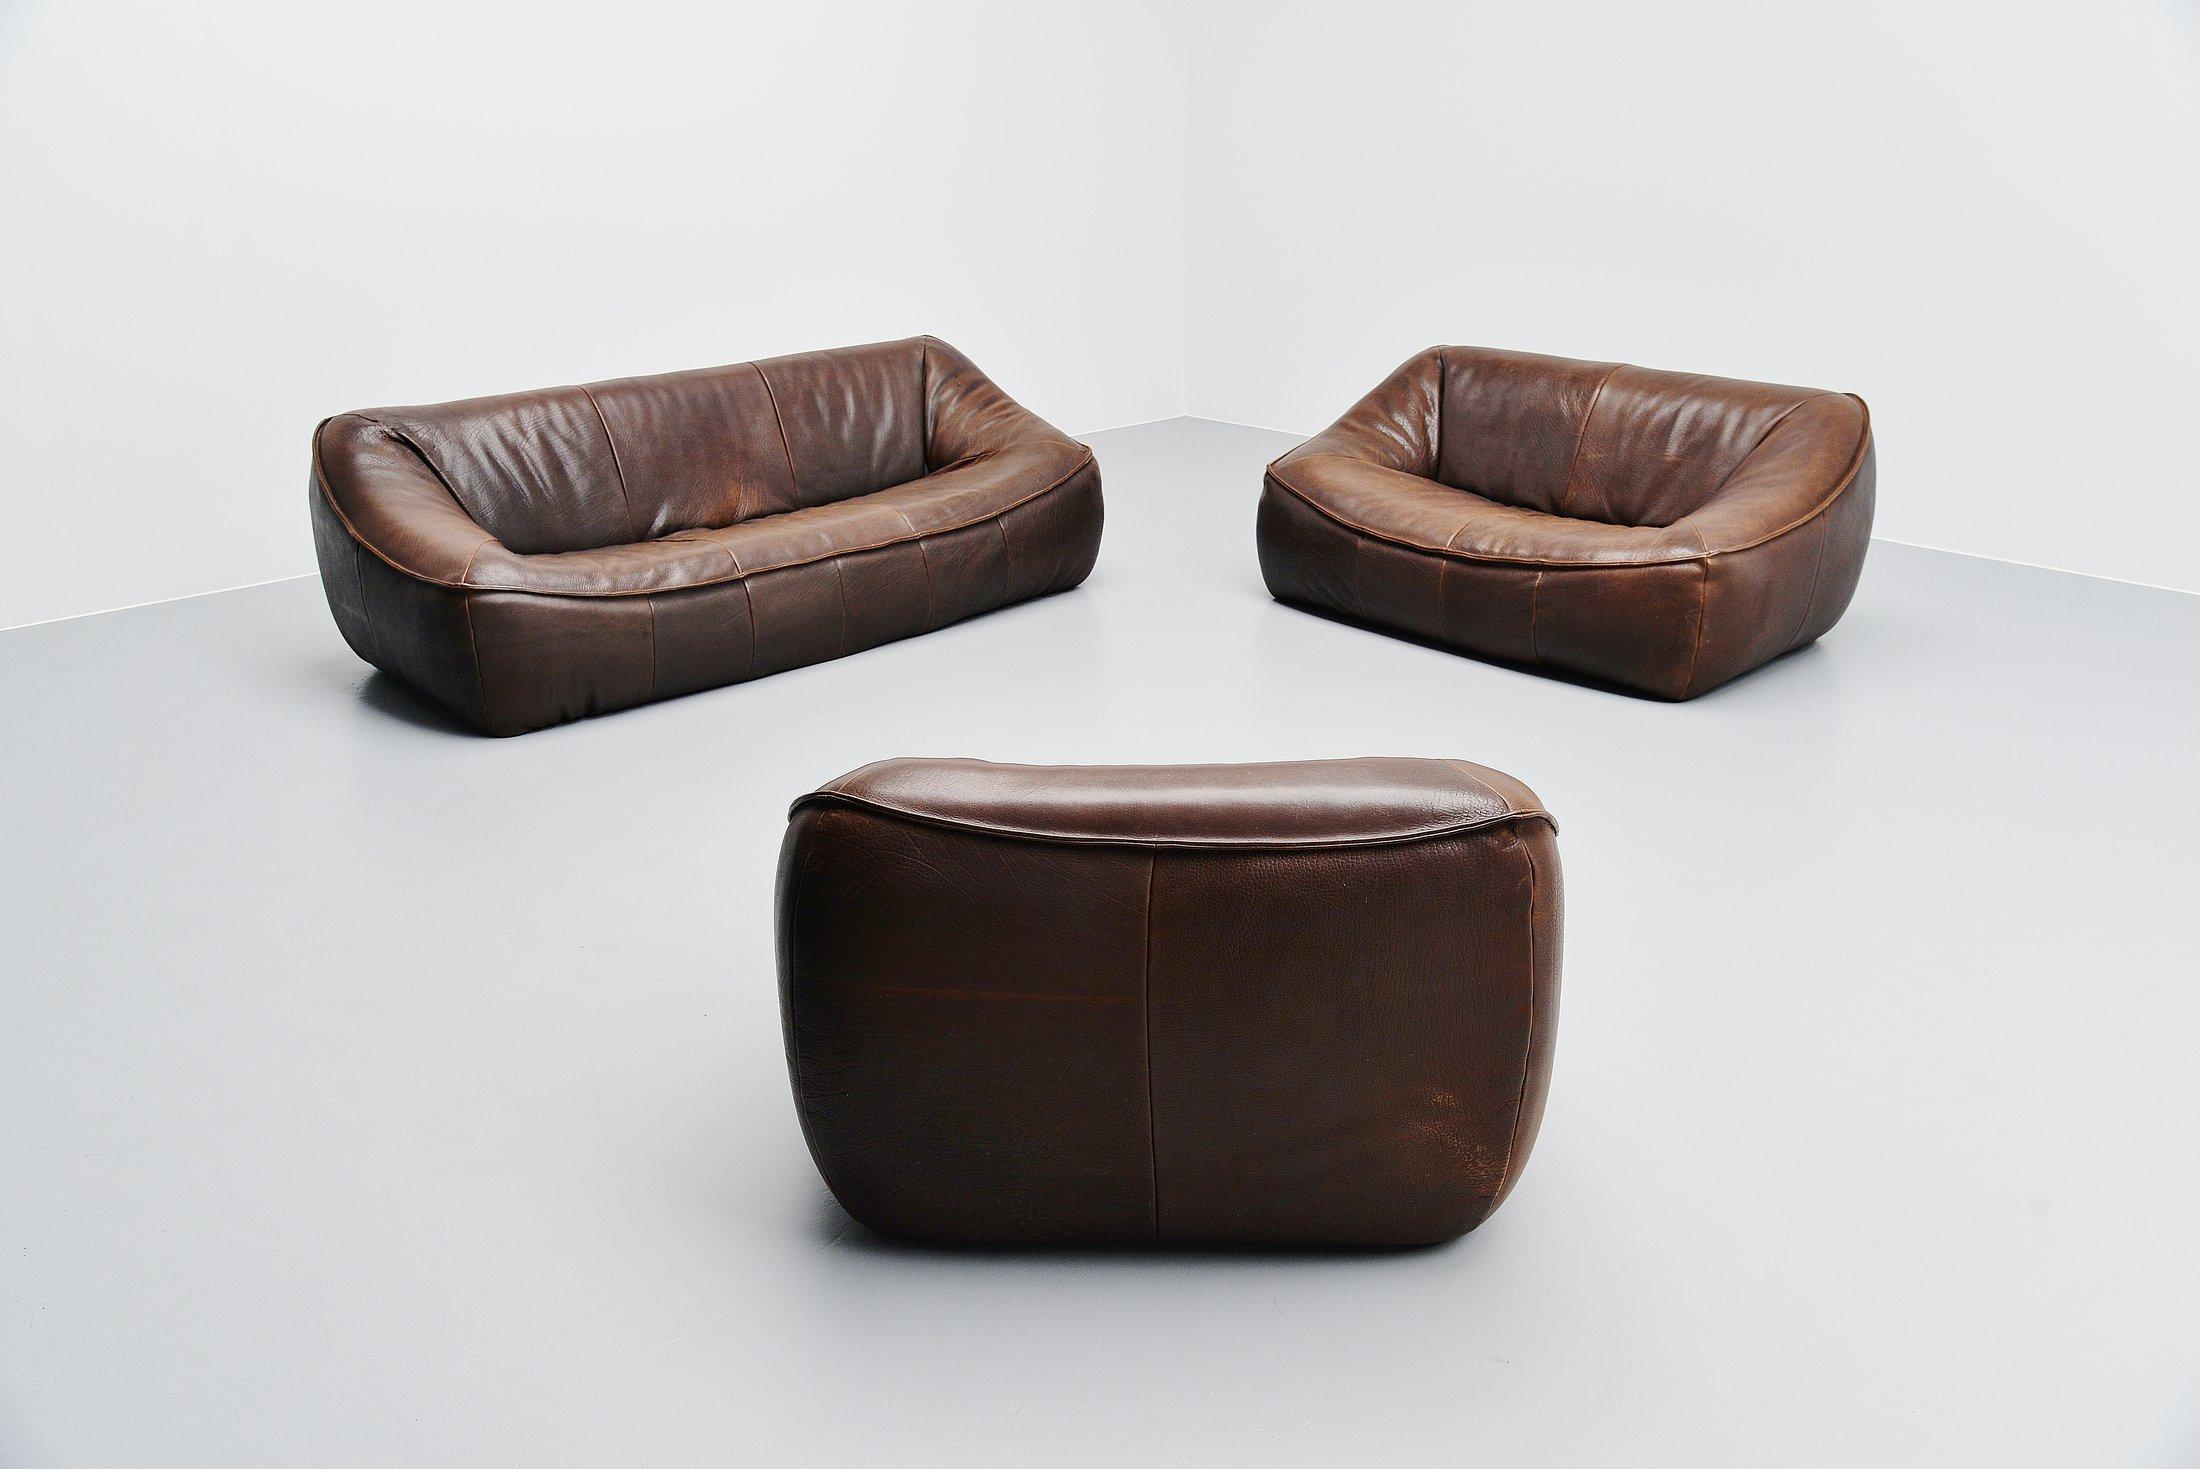 Fantastic 'Ringo' sofa set designed by Gerard Van Den Berg and manufactured by Montis, Holland 1970. This amazing shaped sofa set was made of a metal structure, foam padded and covered with buffalo leather. The very nice dark brown leather has an